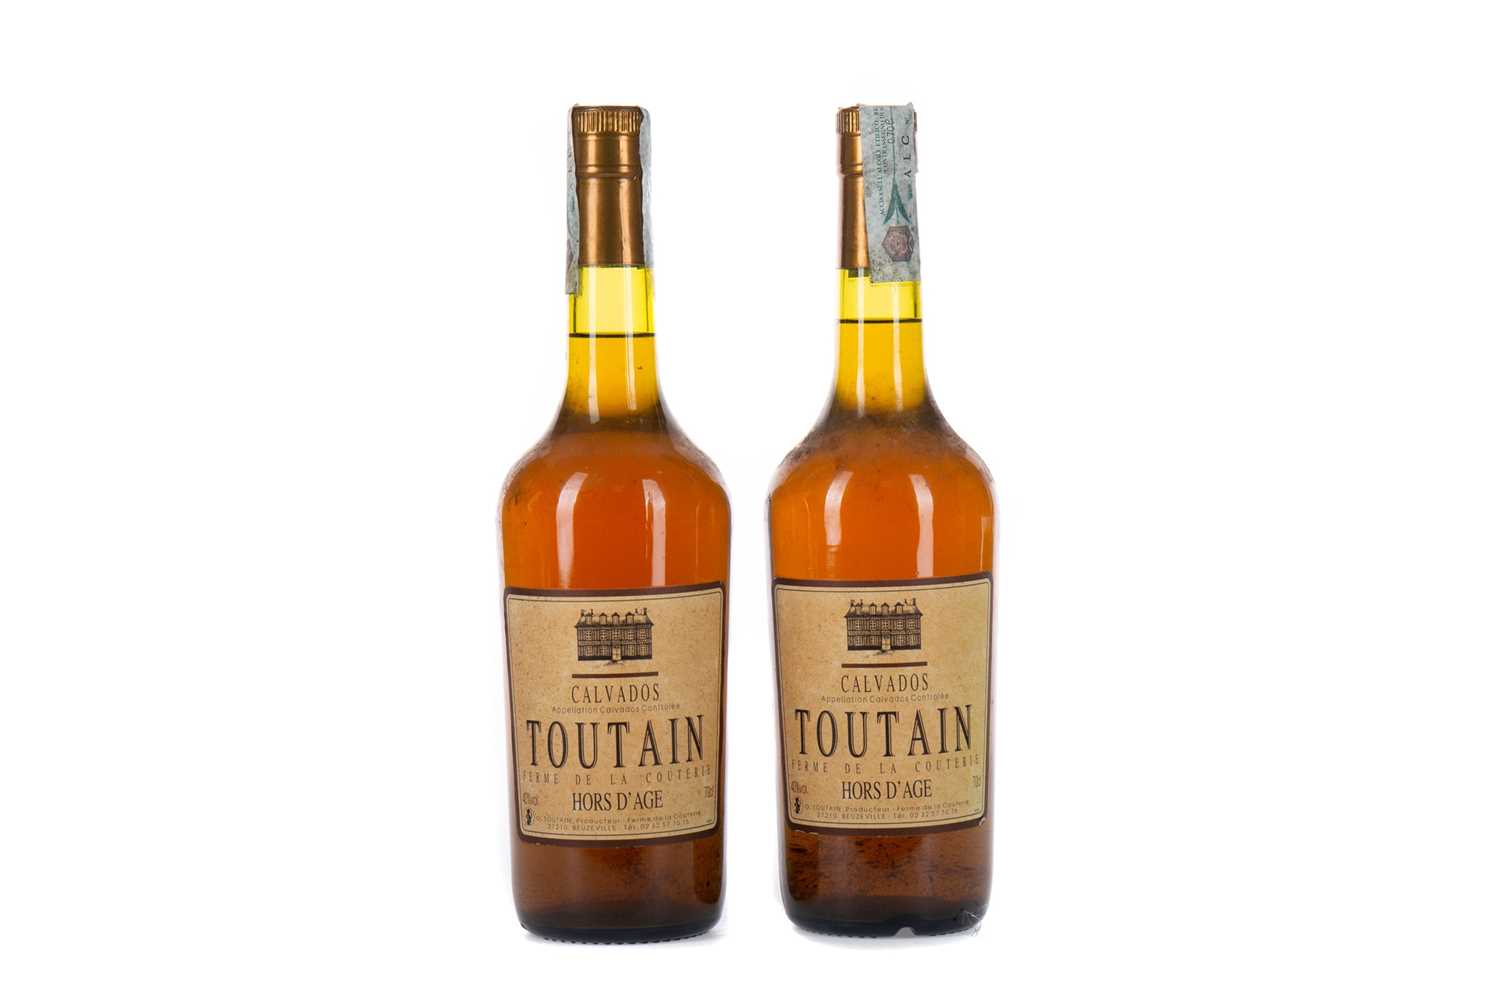 Lot 94 - TWO BOTTLES OF TOUTAIN HORS D'AGE CALVADOS